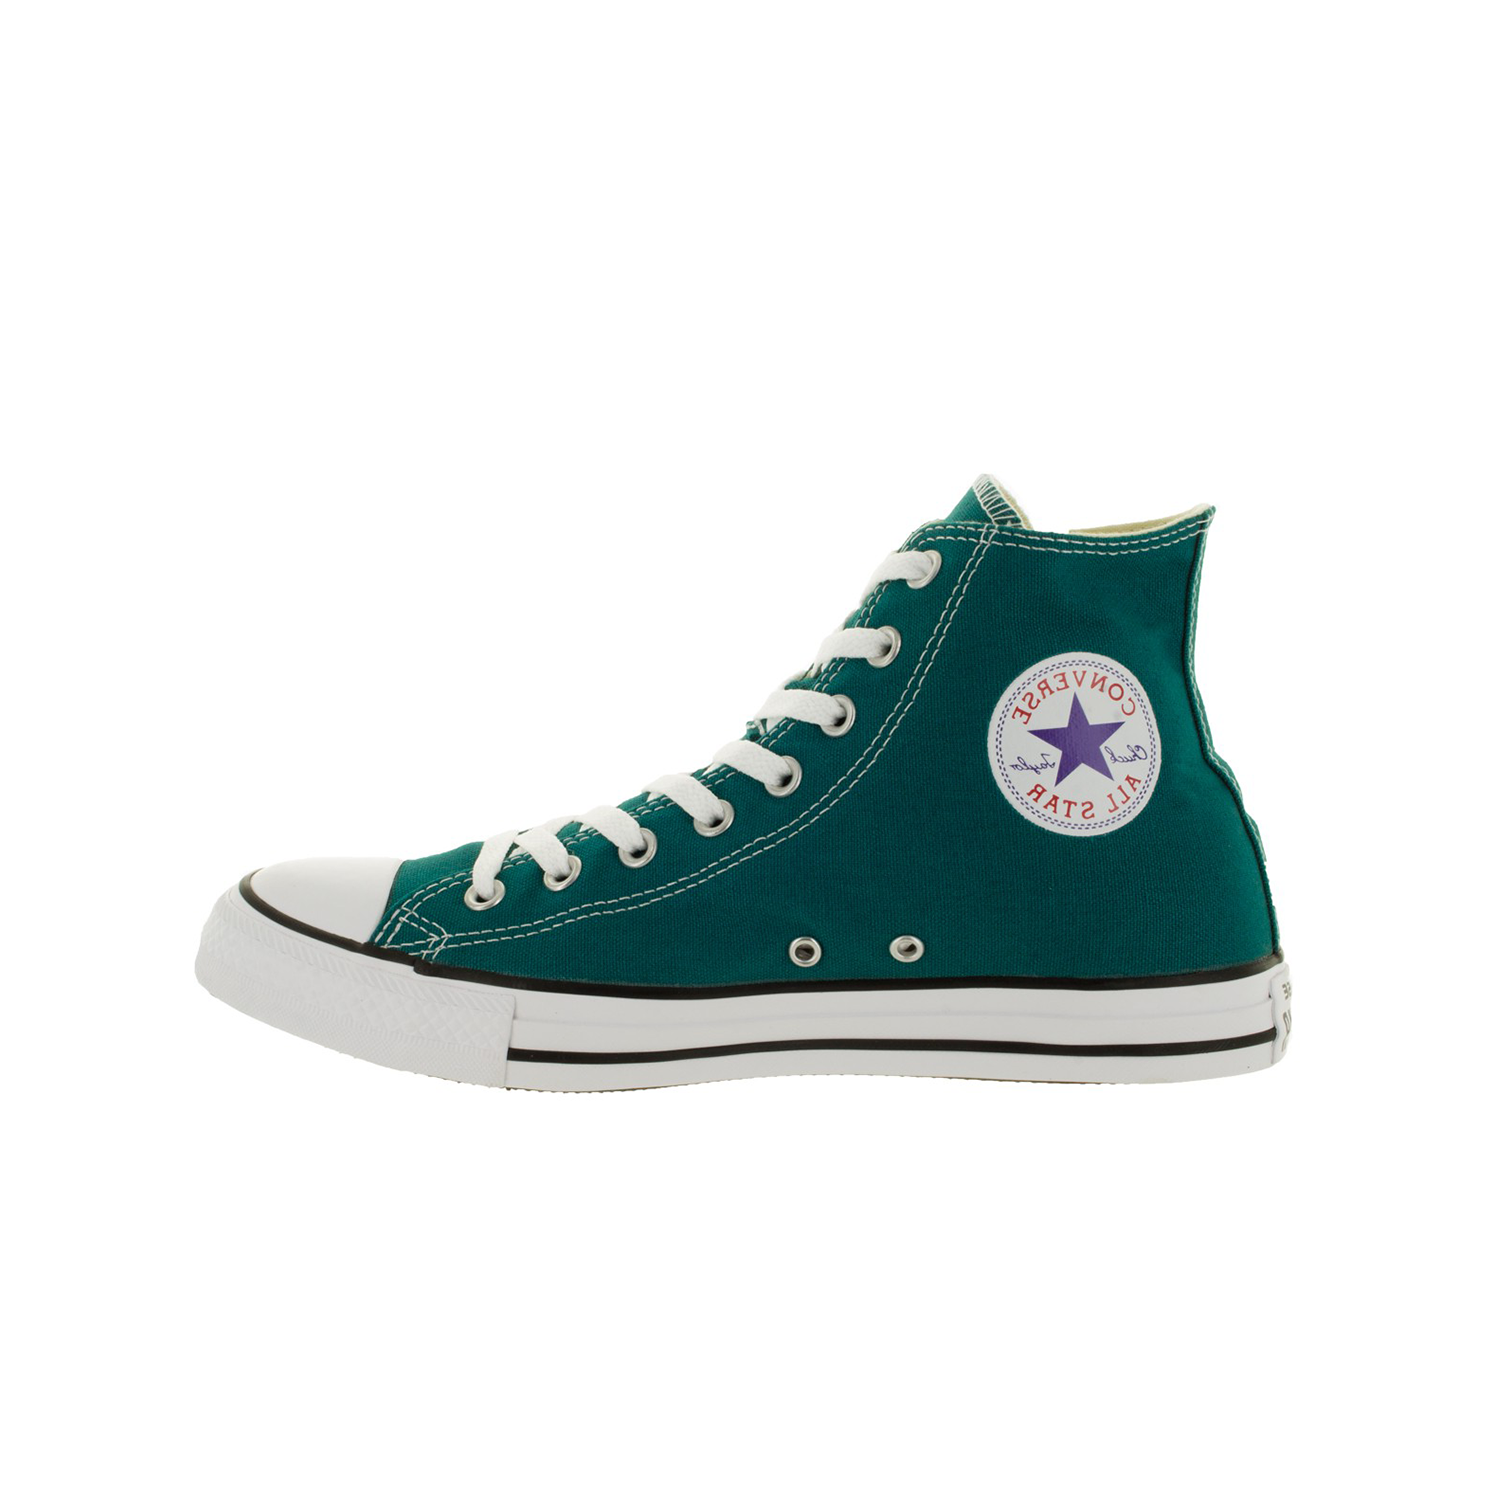 líquido Absurdo velocidad 151172F] Converse Chuck Taylor All-Star HI Shoes – Lace Up NYC